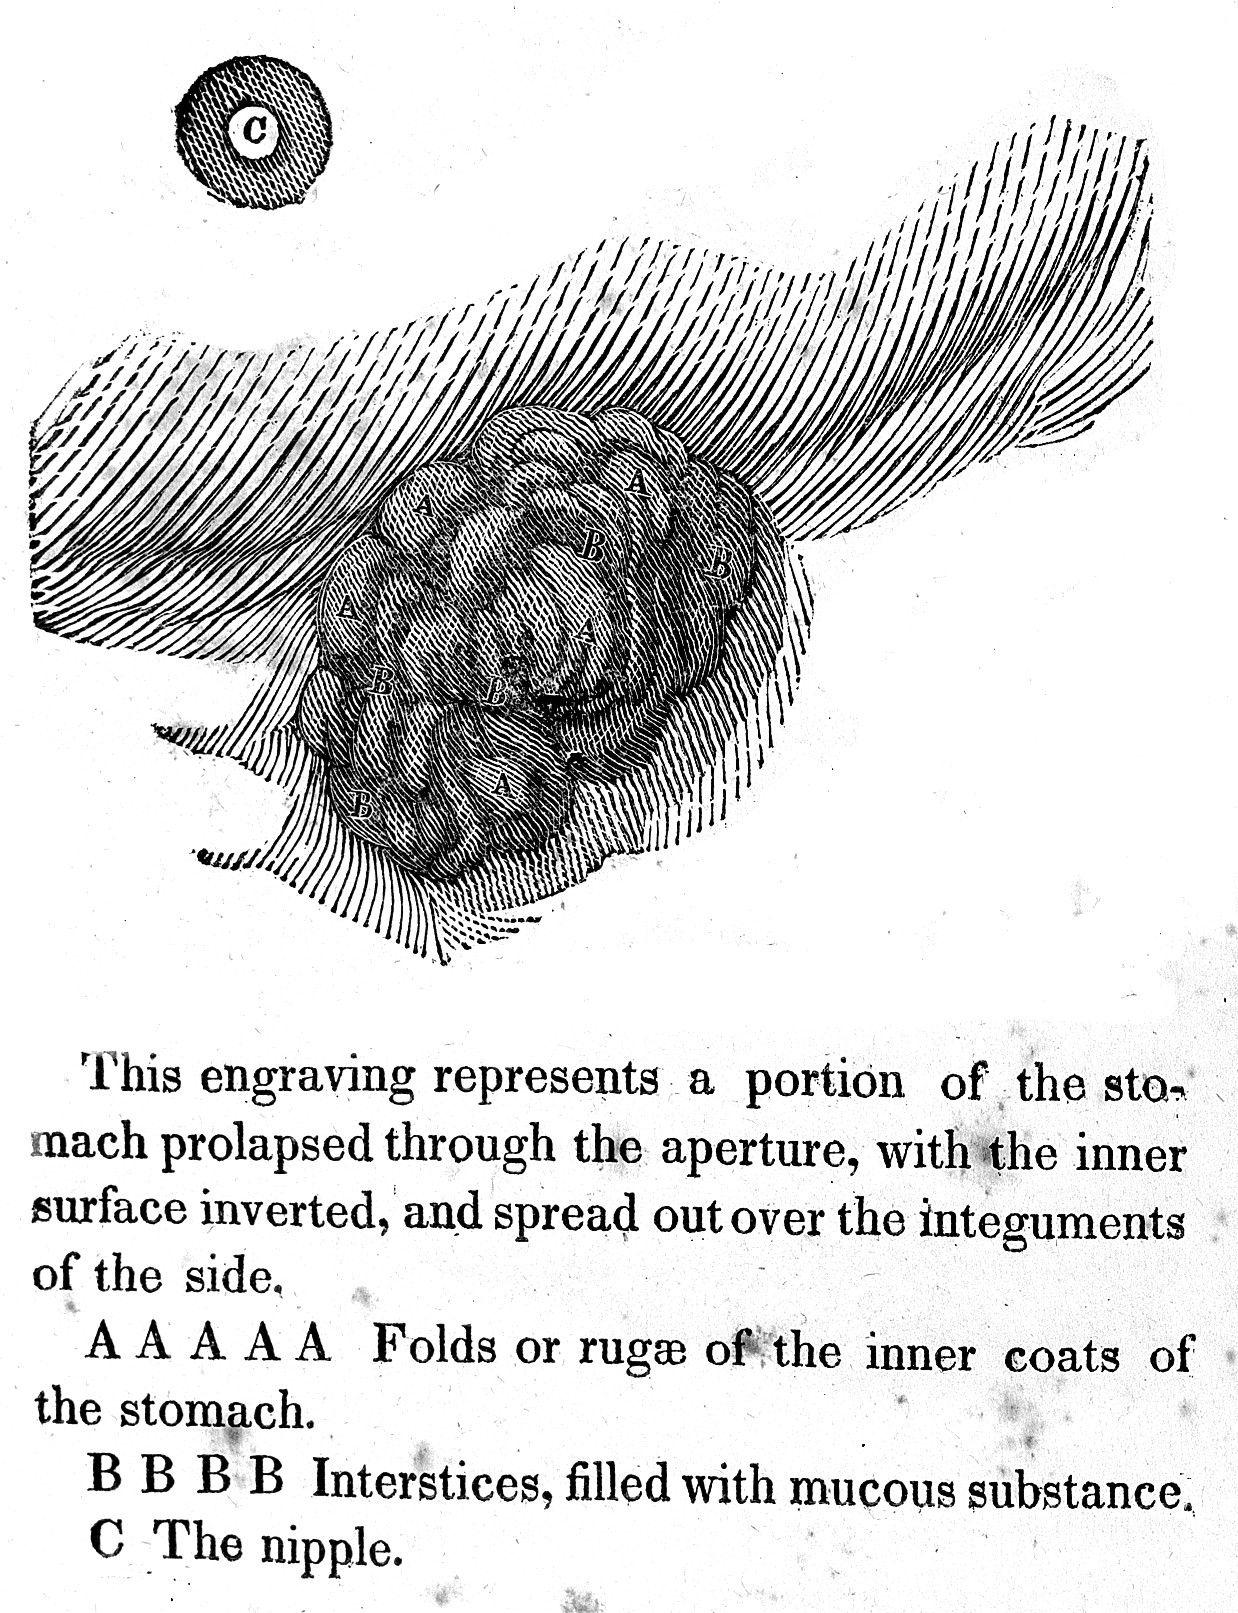 William Beaumont Logo - File:Prolapsed stomach, William Beaumont, 1833 Wellcome L0005180.jpg ...